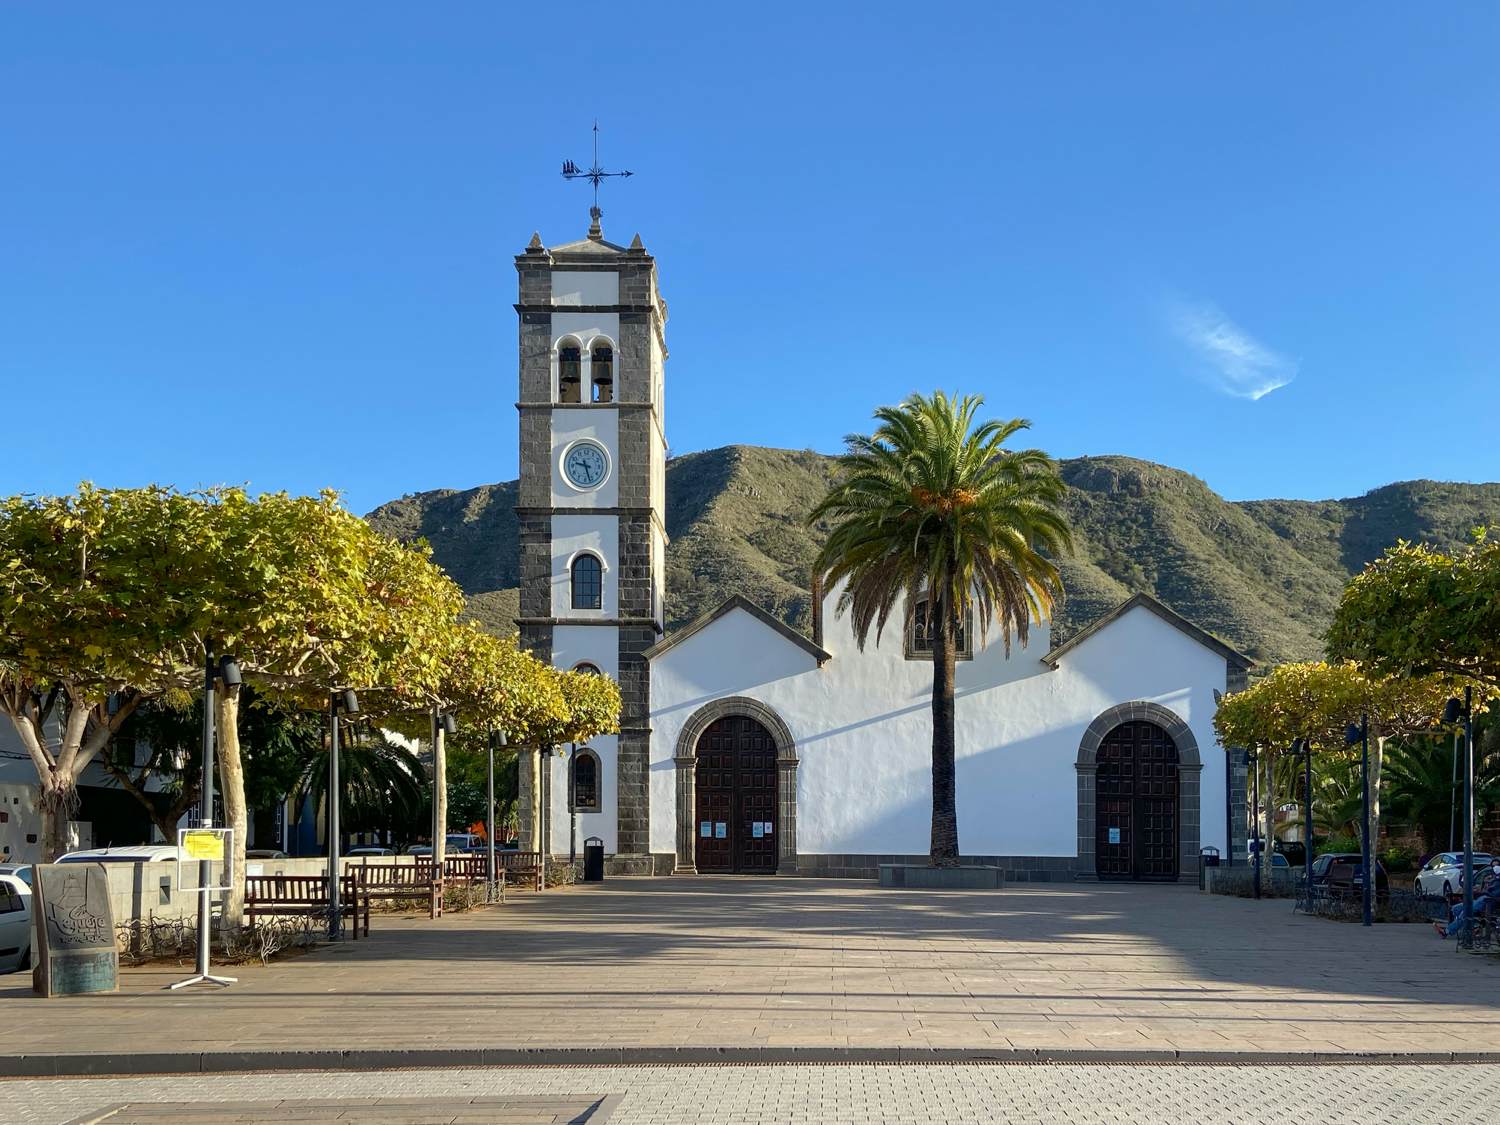 Starting point: Church square (Plaza San Marcos) in Tegueste